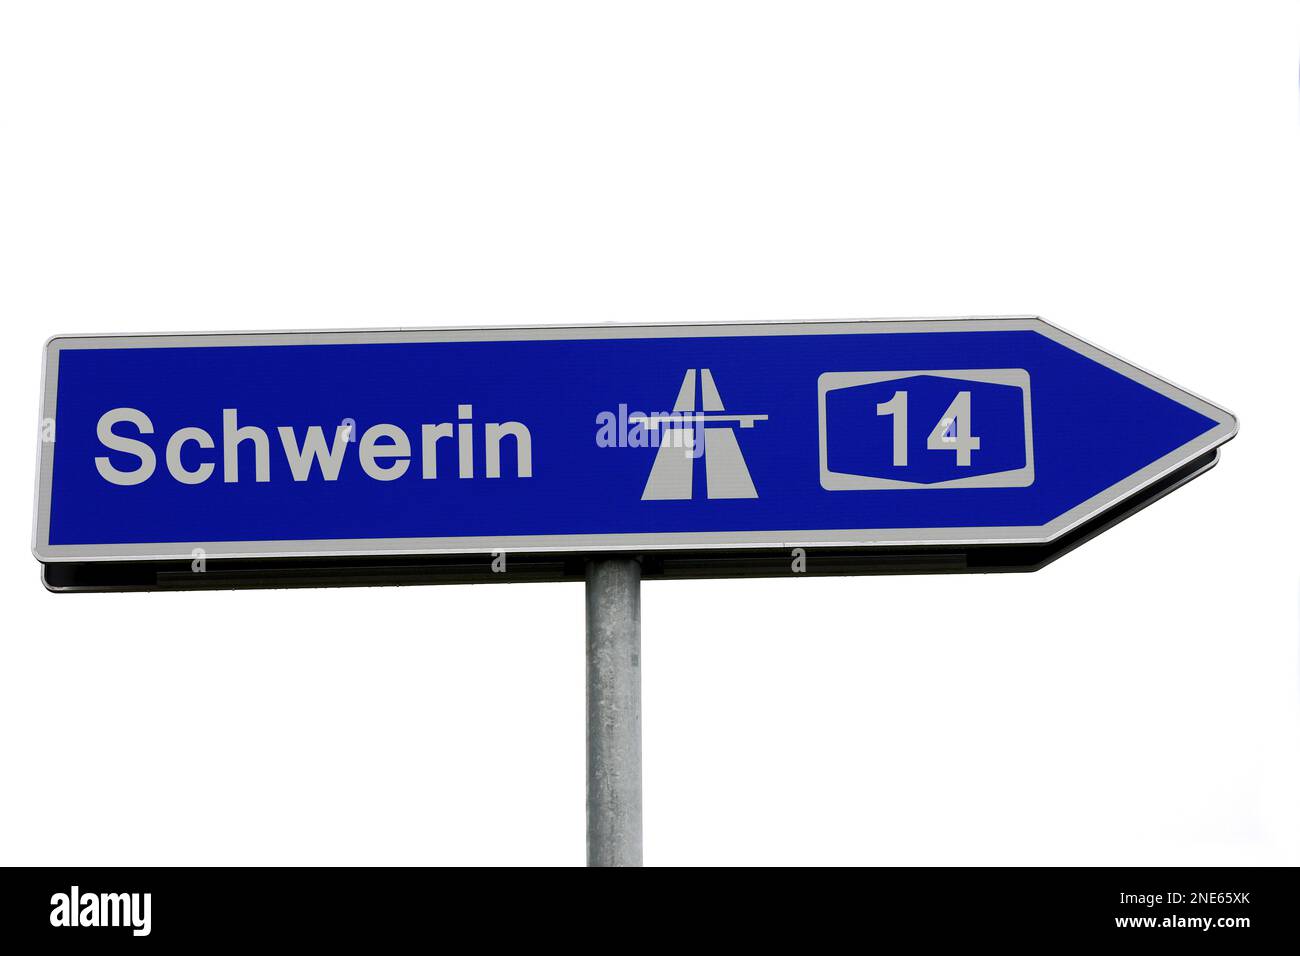 Signpost to the A14 motorway towards Schwerin Stock Photo